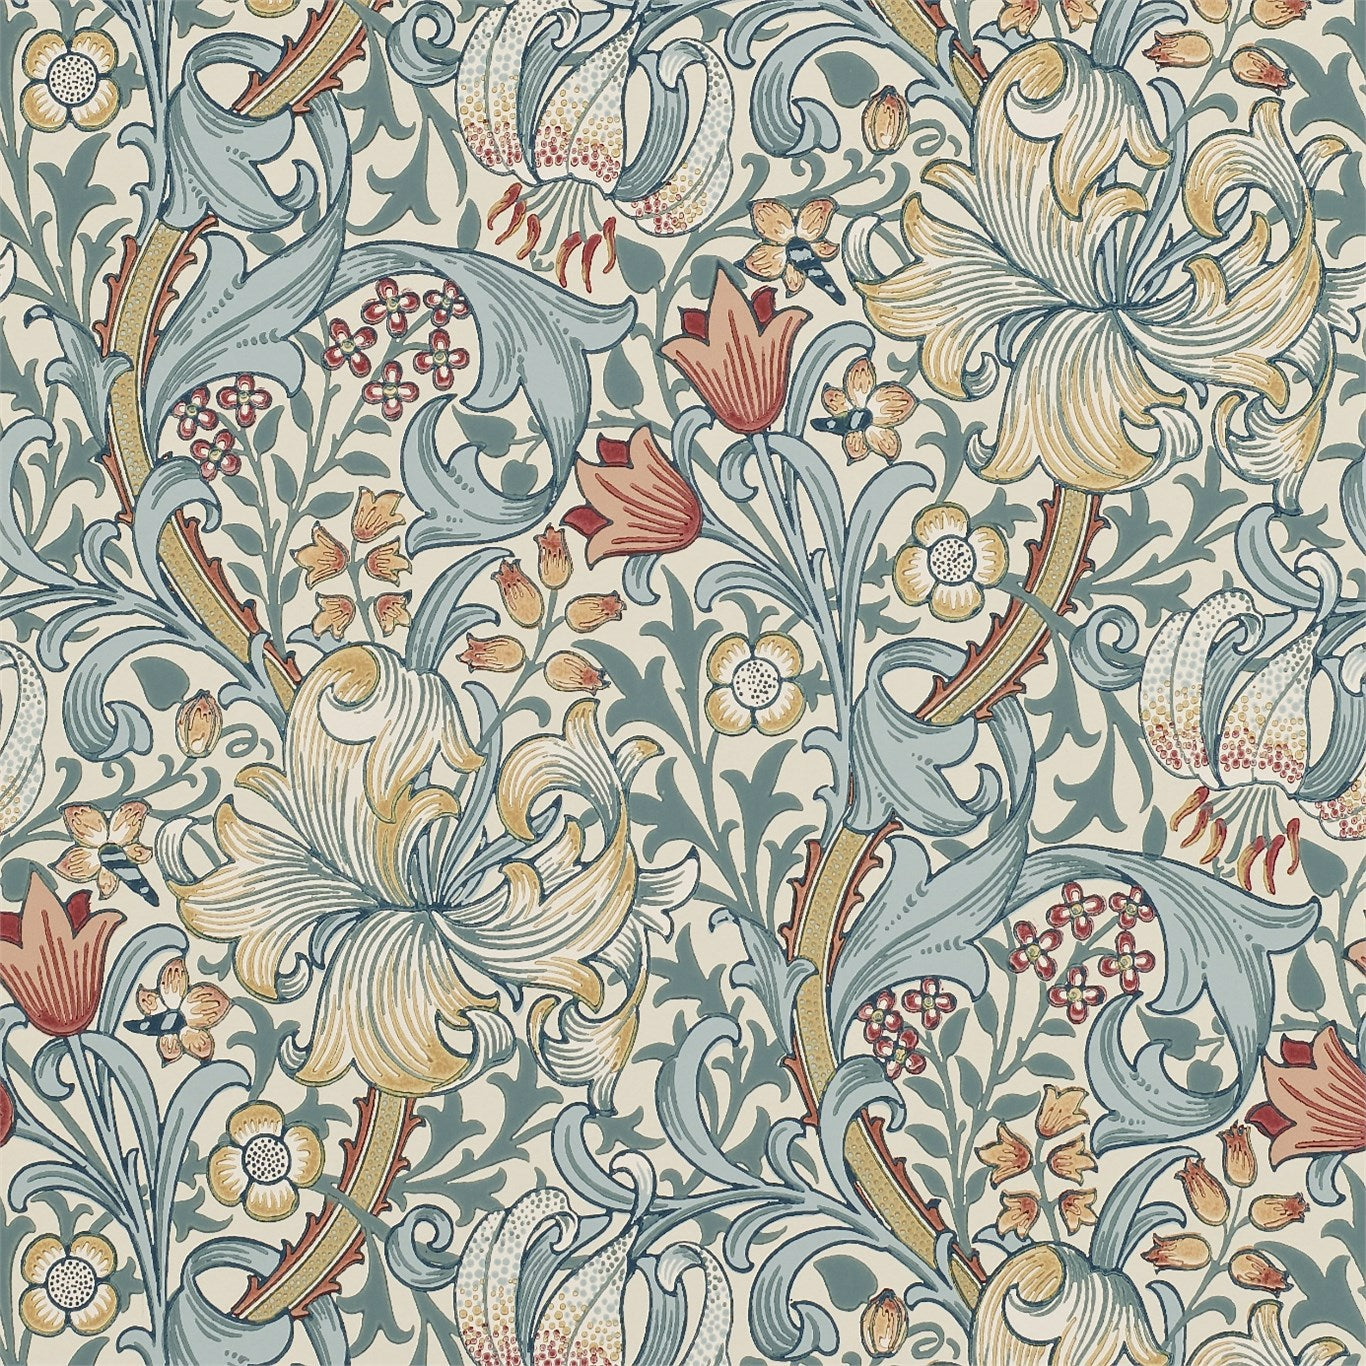 Golden Lily Slate/Manilla Wallpaper DM6P210401 by Morris & Co